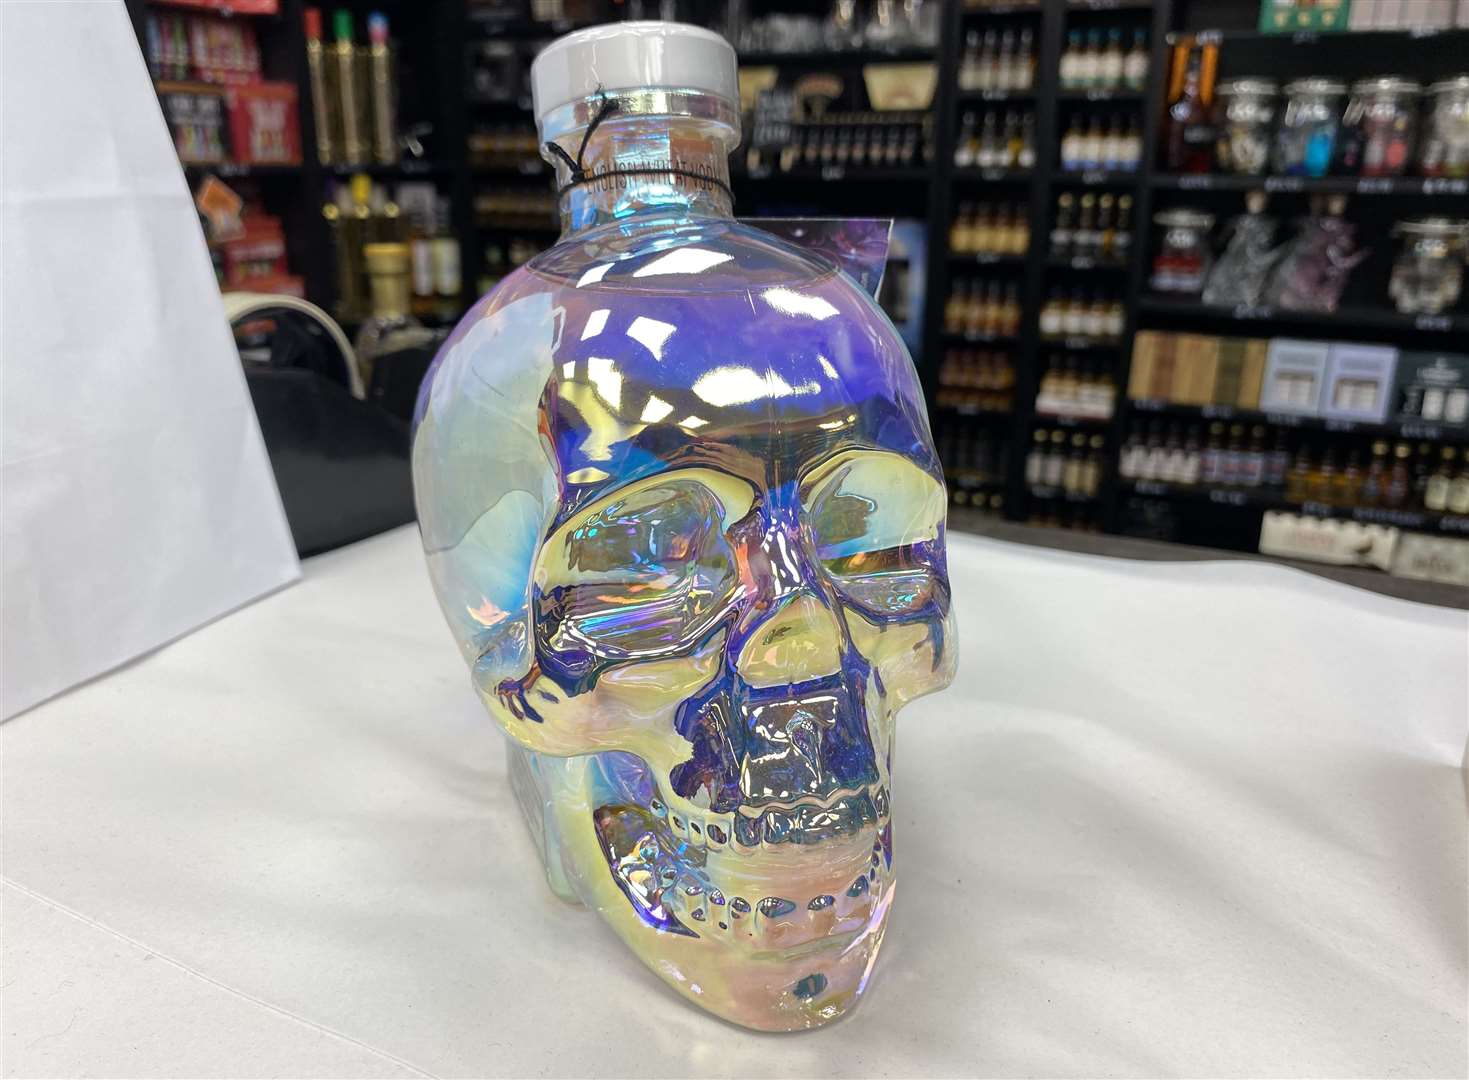 The Crystal Head Aurora vodka from Canada is Shirley's favourite bottle in the shop